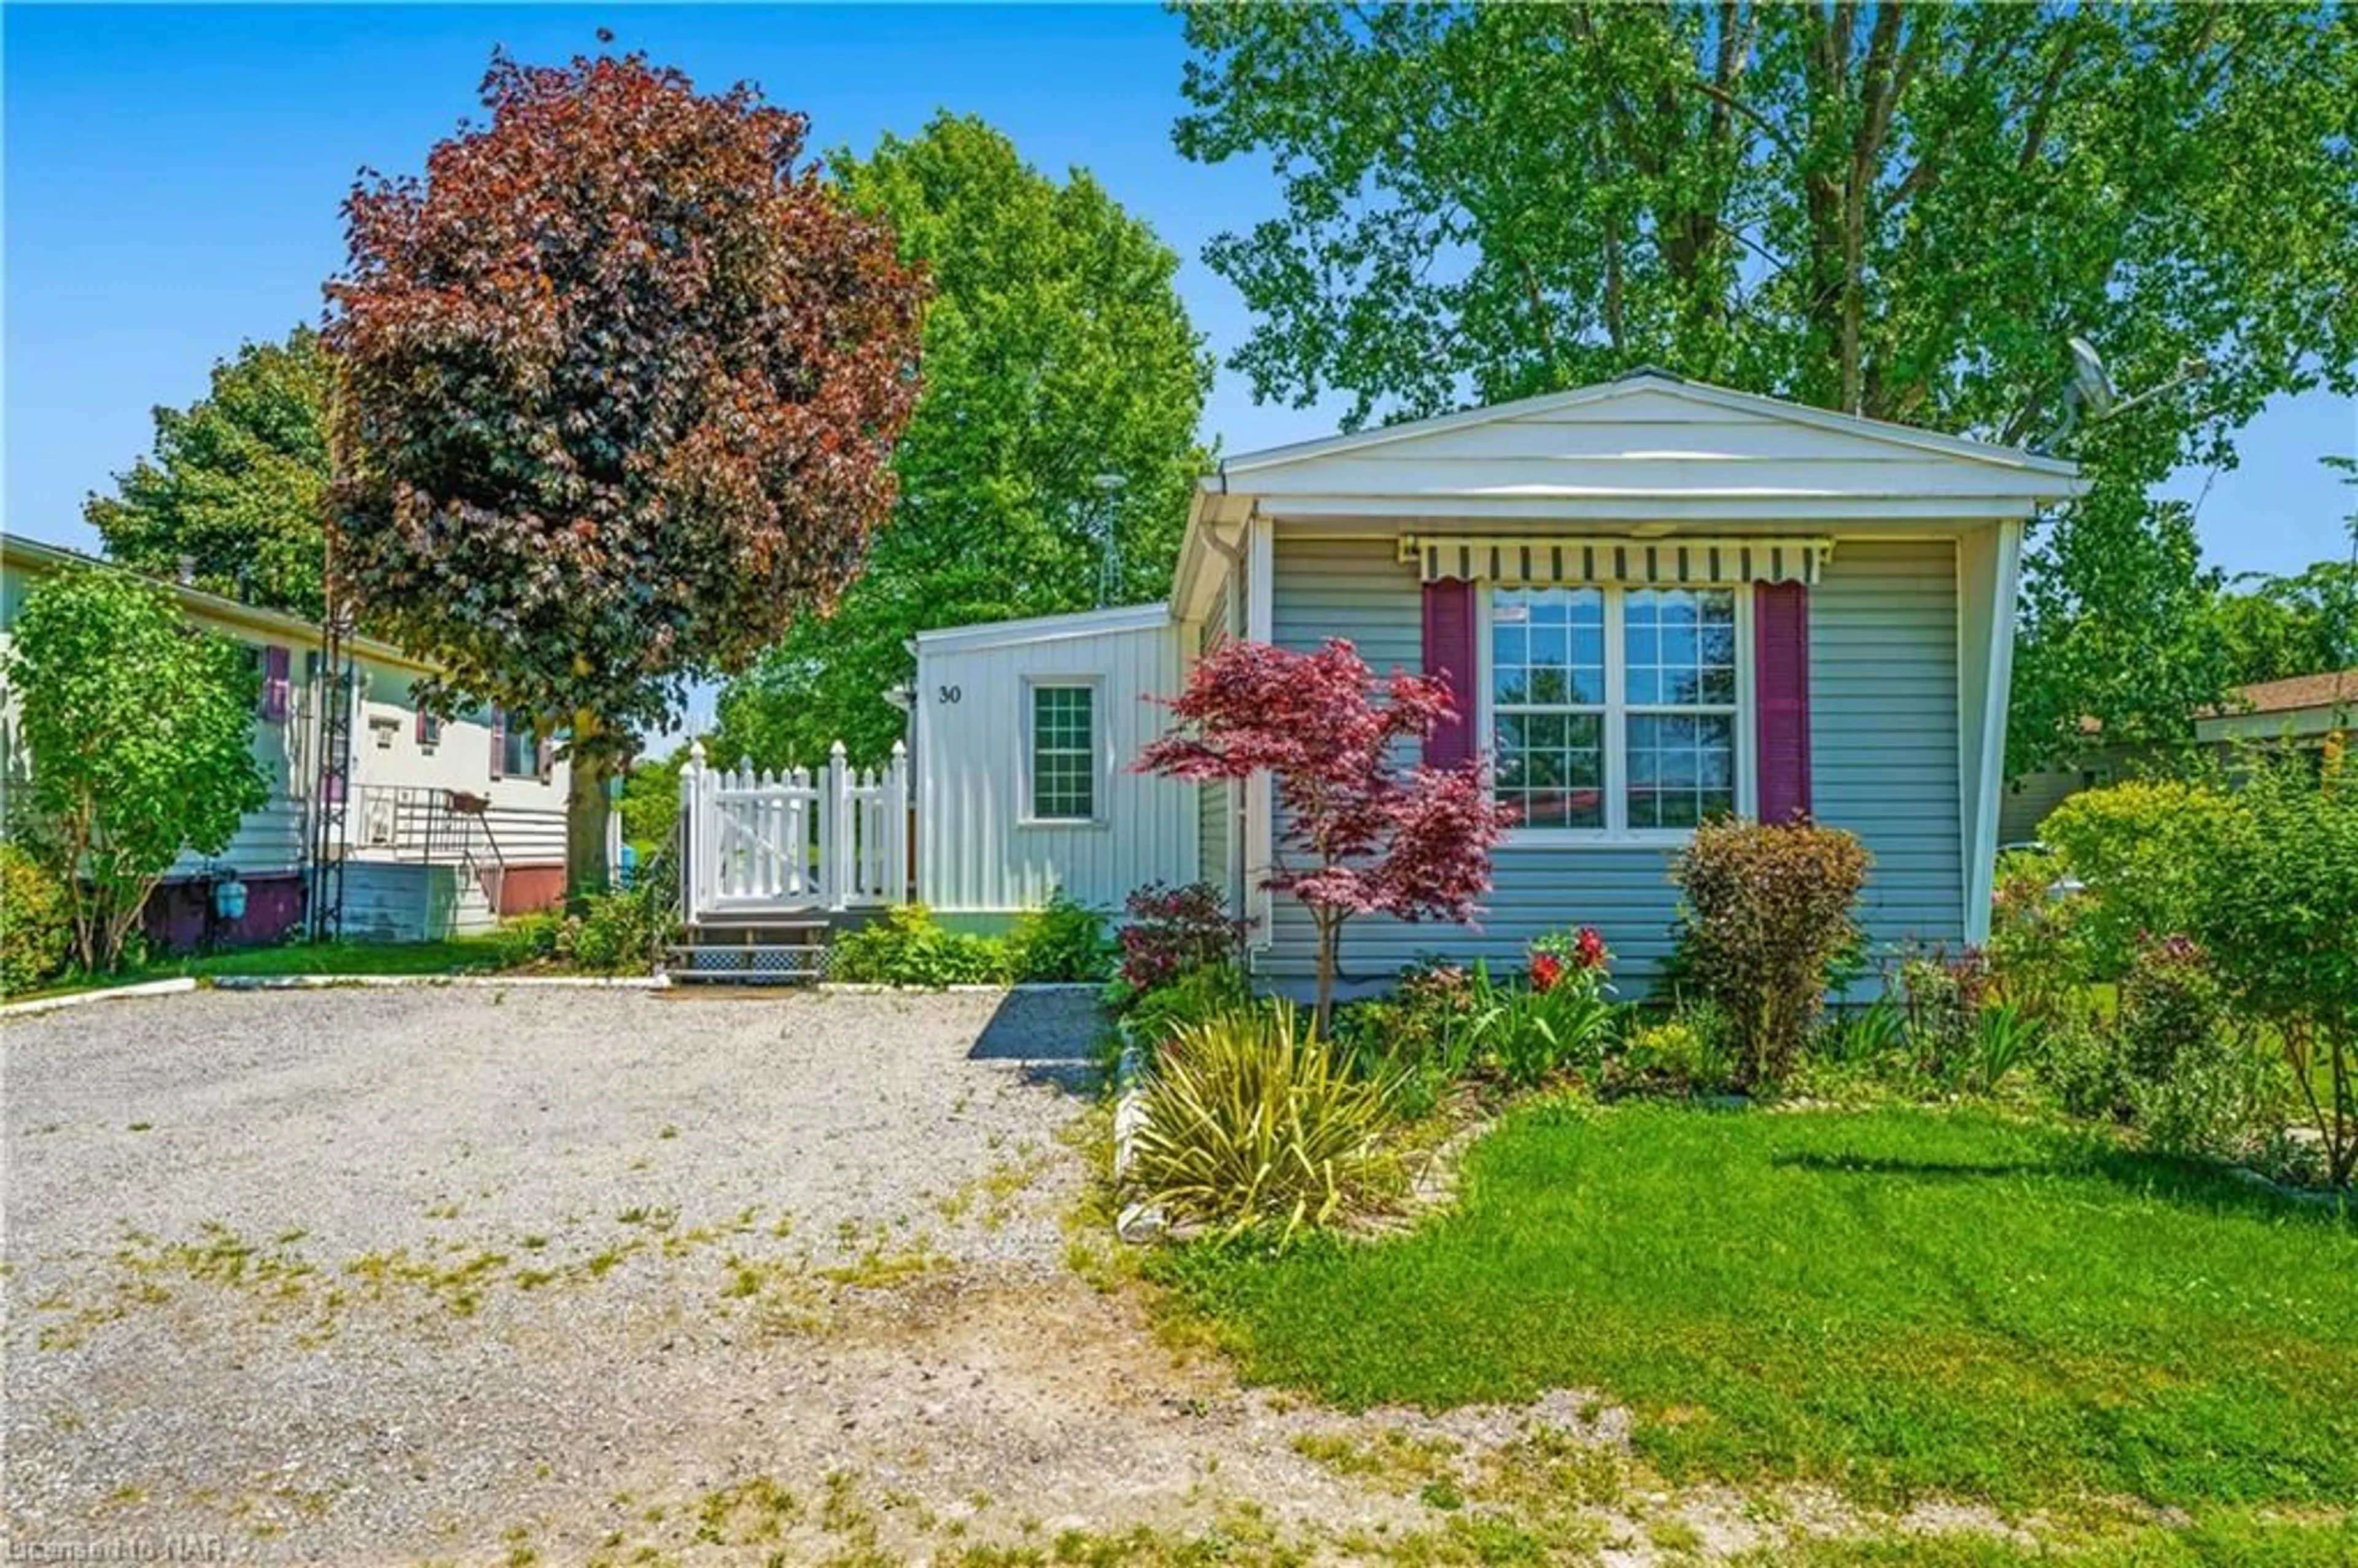 Cottage for 43969 Highway 3 Hwy #30, Wainfleet Ontario L0S 1V0